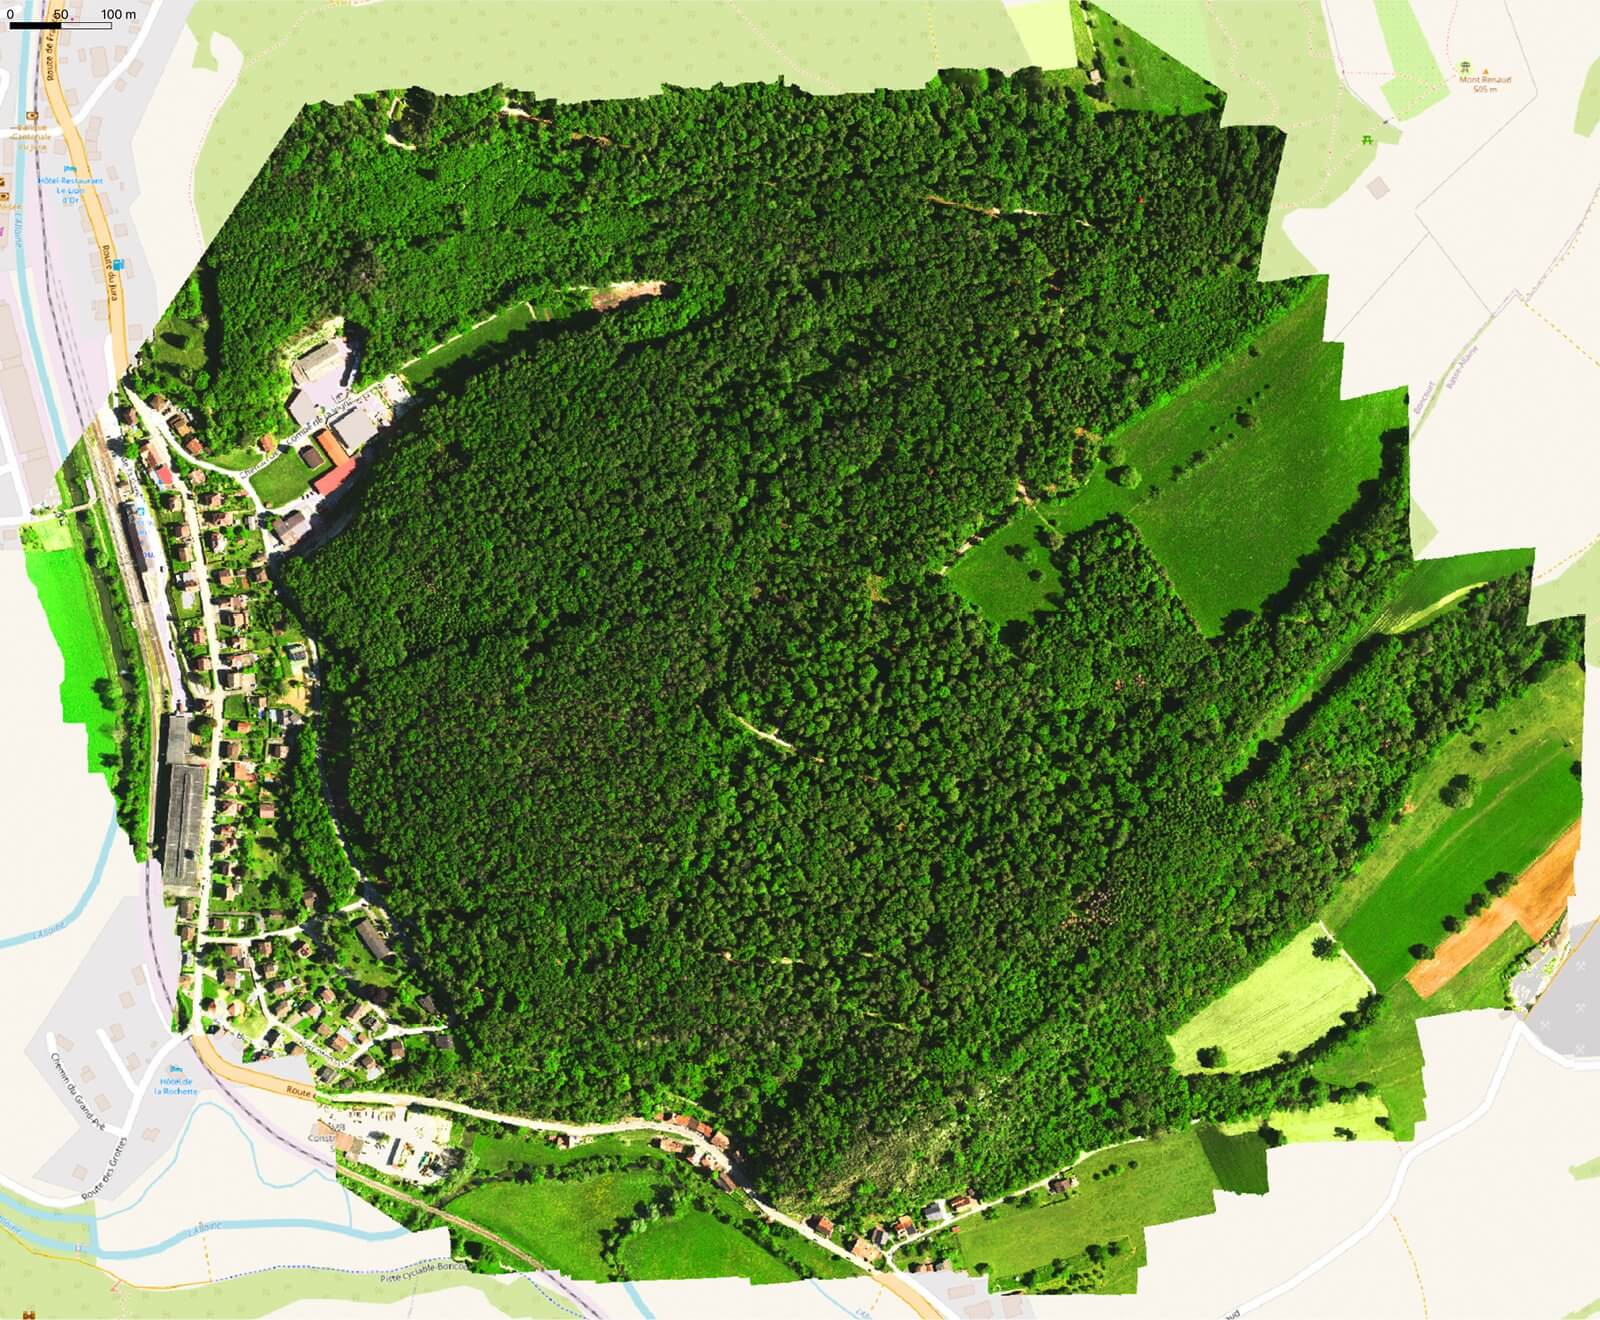 Multispectral drone output in the Jura mountains